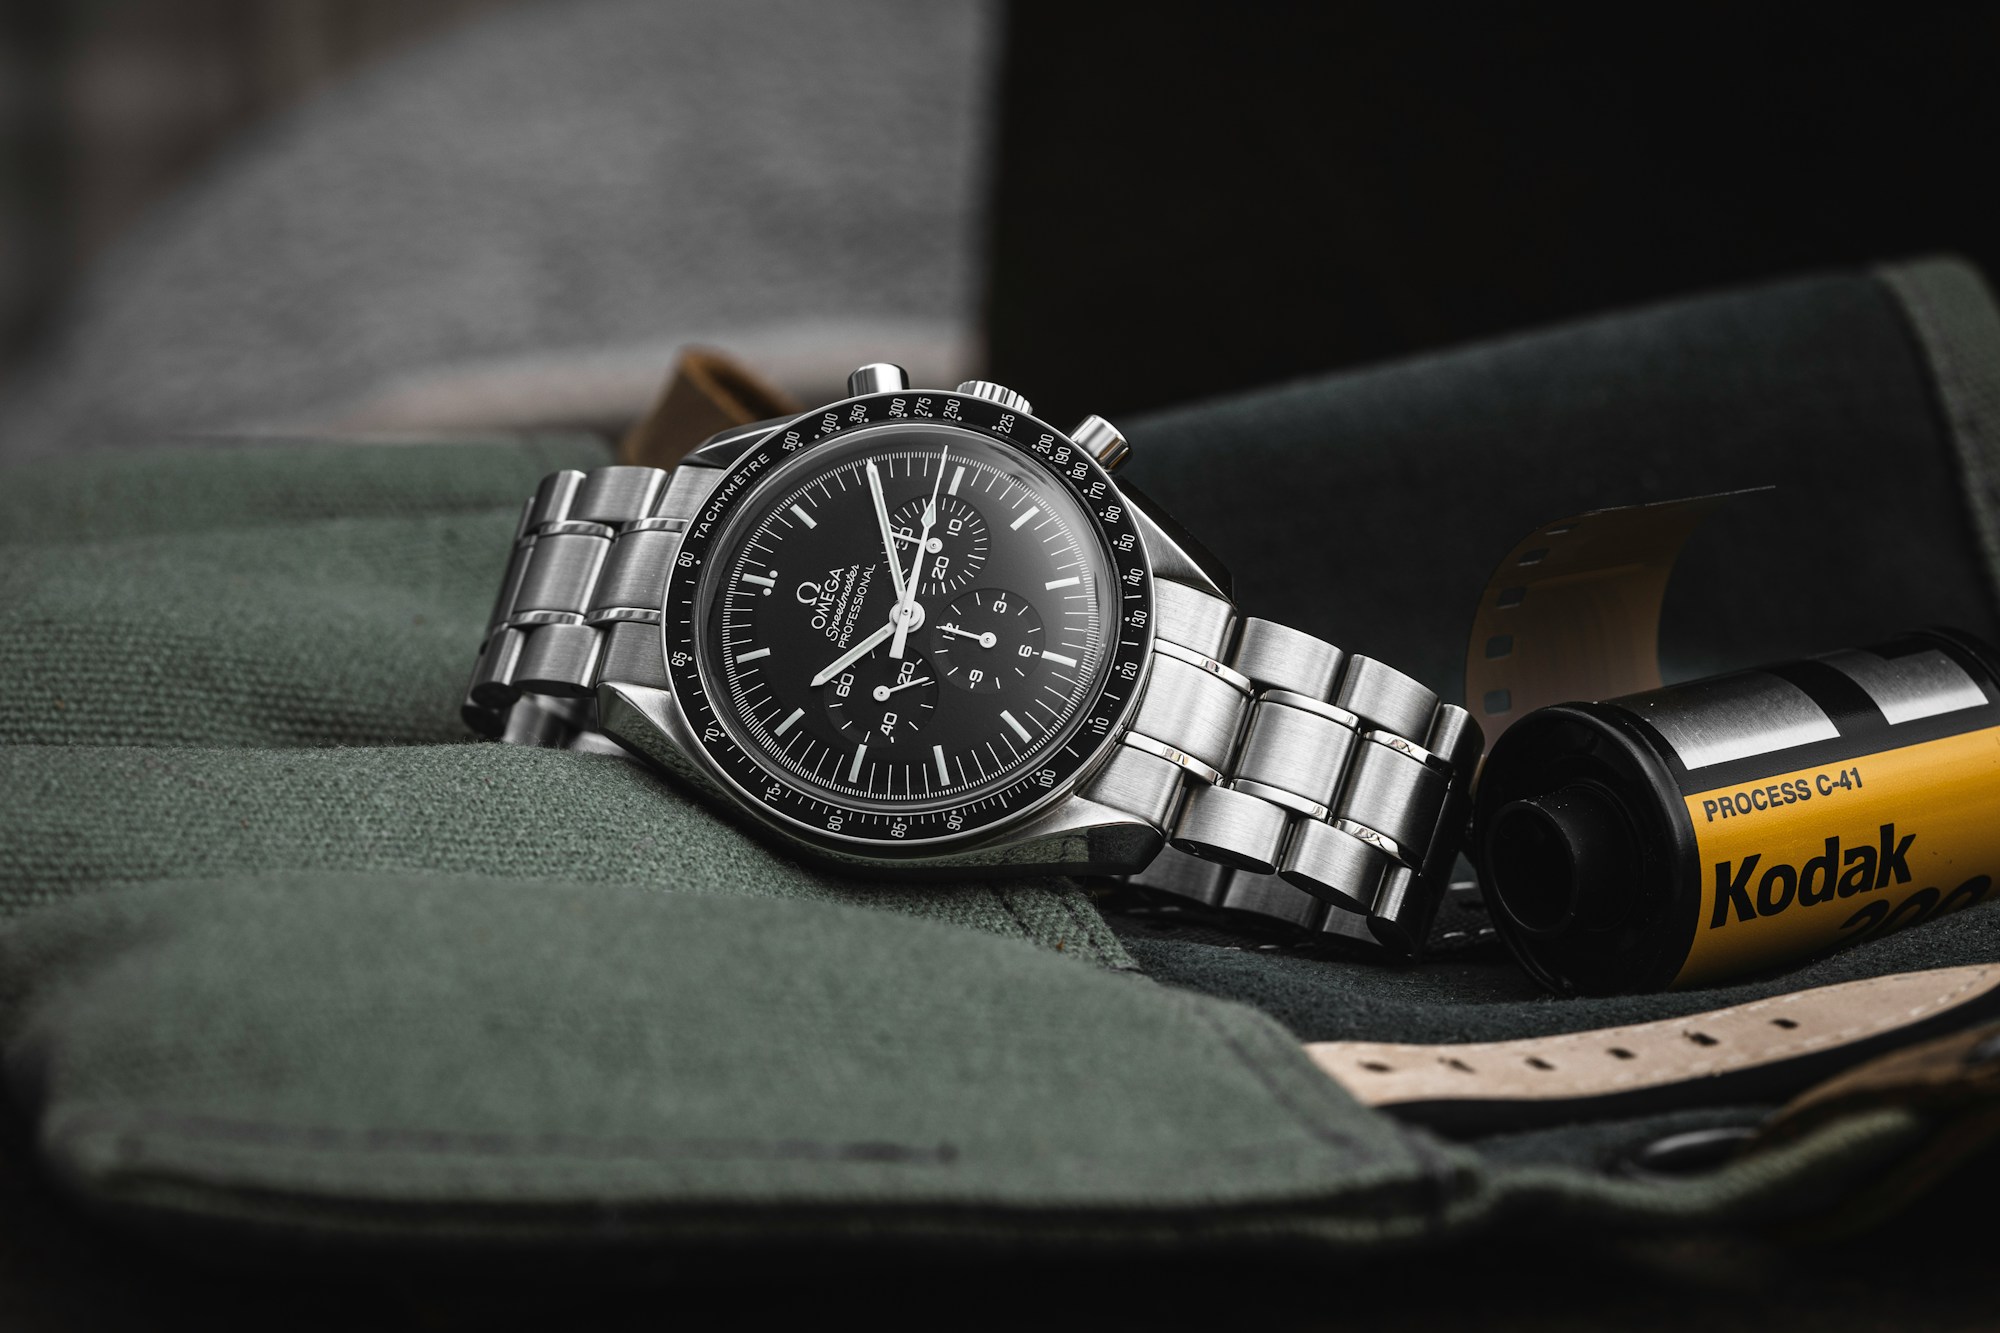 Omega Speedmaster Professional Moonwatch for $6,737 for sale from a Private  Seller on Chrono24